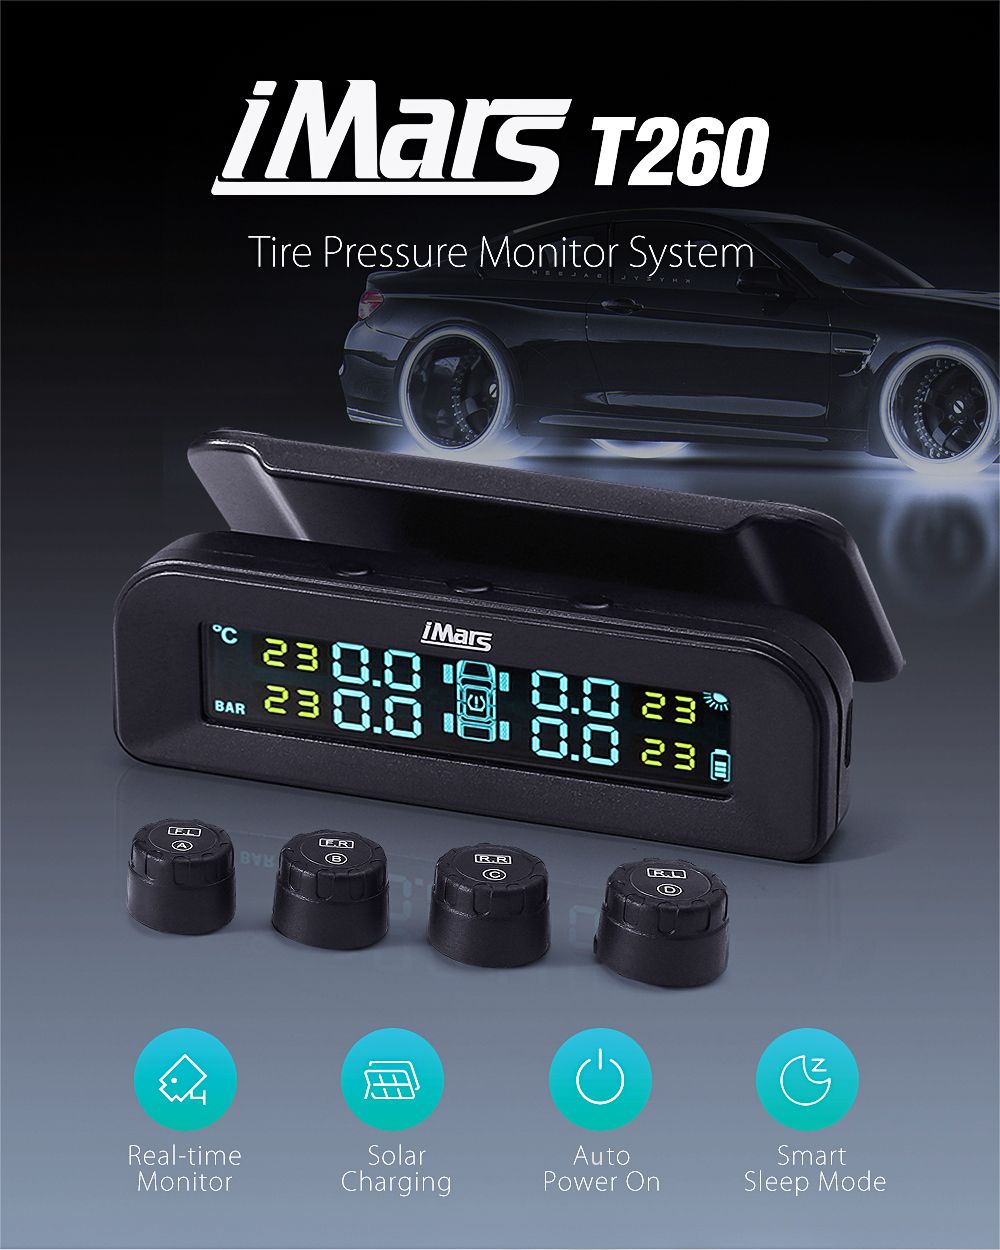 iMars-T260-Solar-Tire-Pressure-Monitor-System-Real-time-Tester-LCD-Screen-4-External-Sensors-Auto-Po-1646161